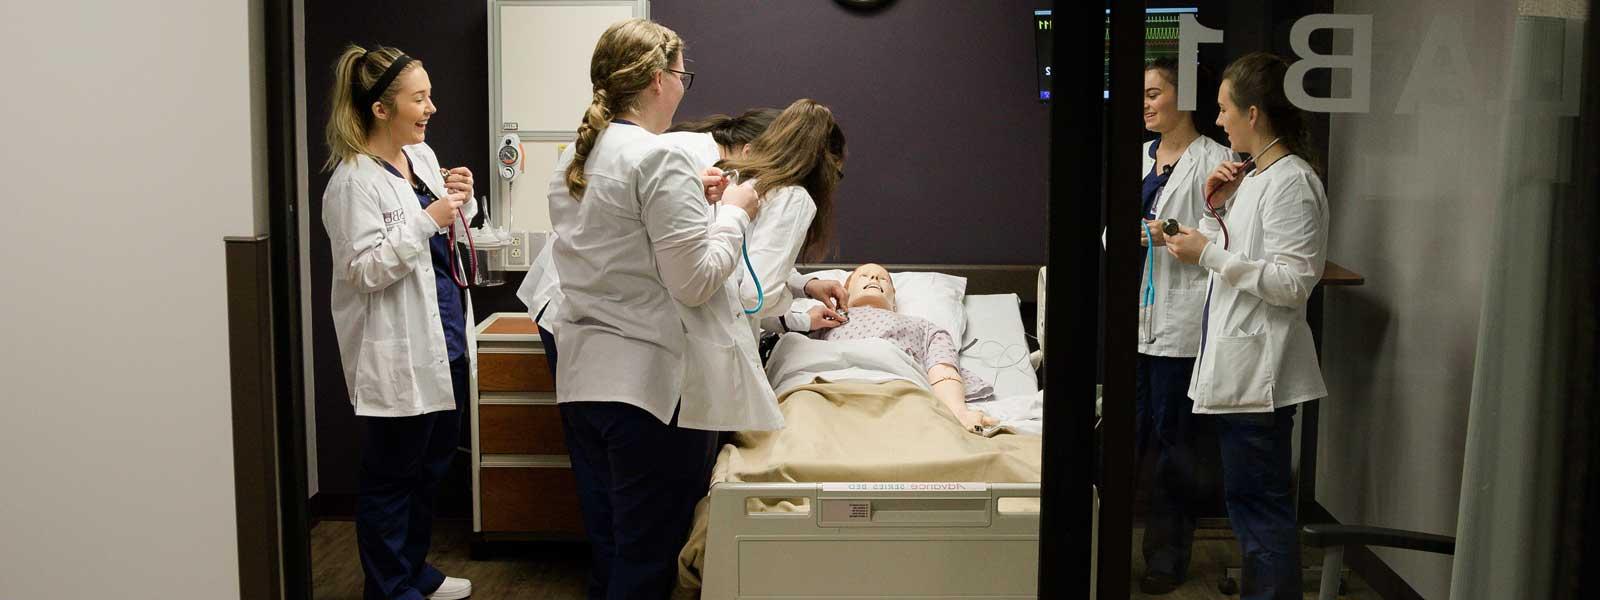 group of nursing students in simulation lab practicing listening to mannequin's heartbeat